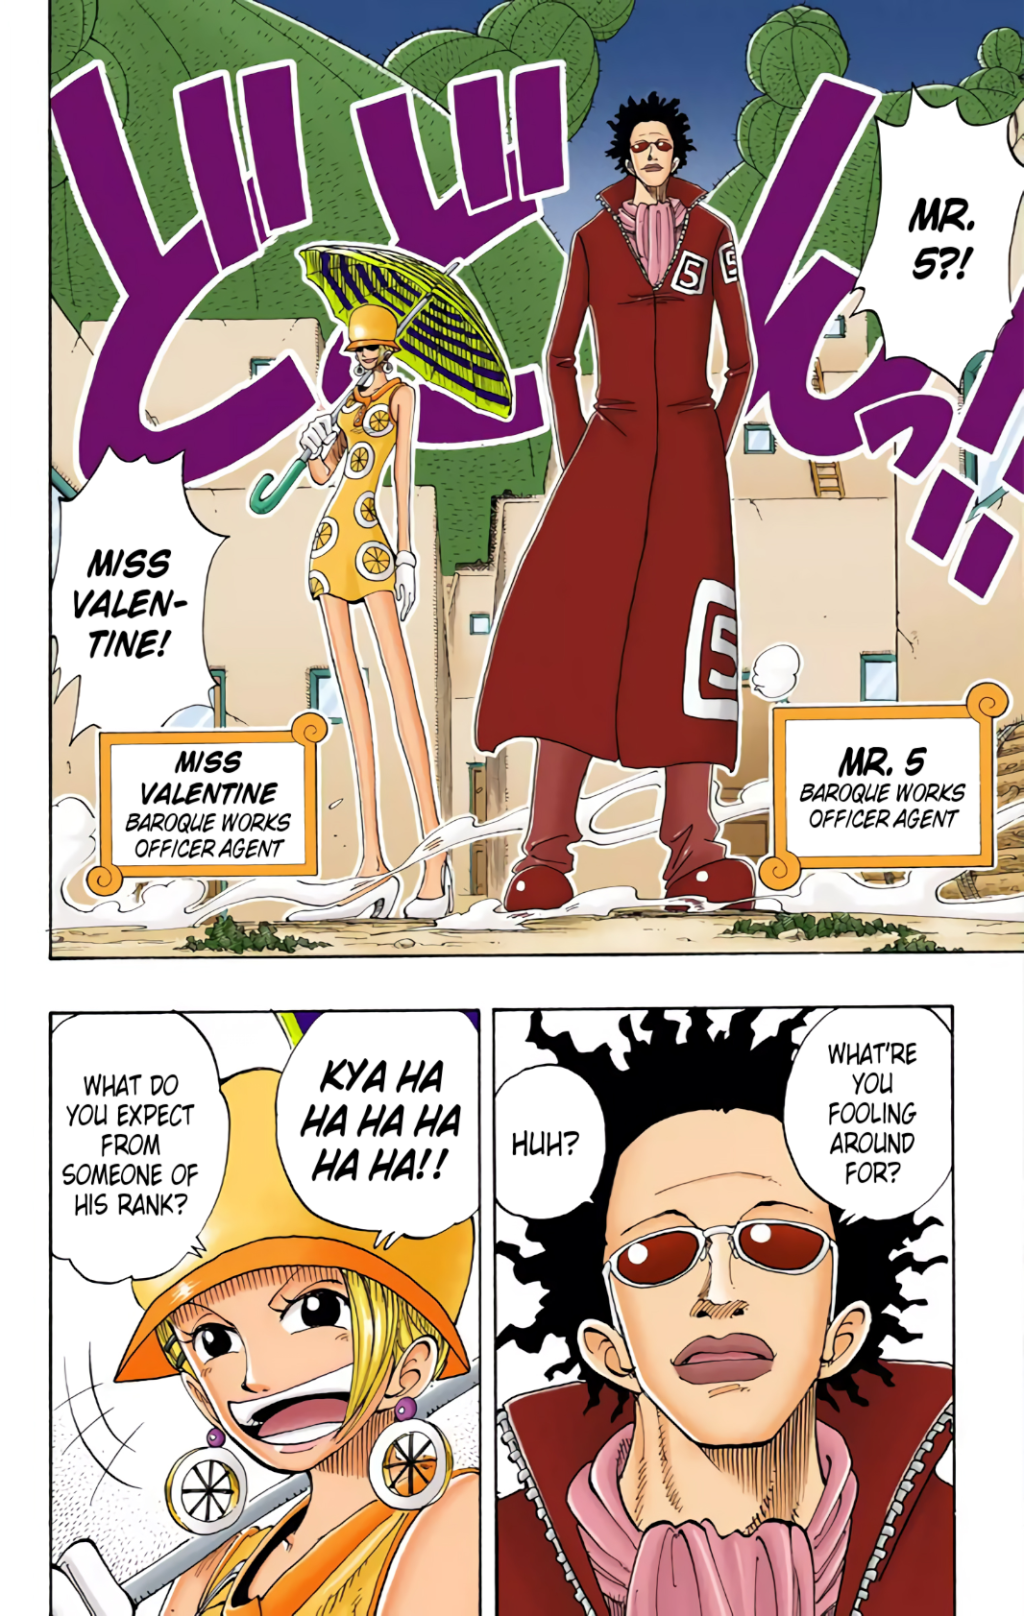 Miss Valentine and Mr. 5 confront the Straw Hats in One Piece Chapter 110 "The Night Isn't Over" (1999), Shueisha. Words and art by Eiichor, Oda.